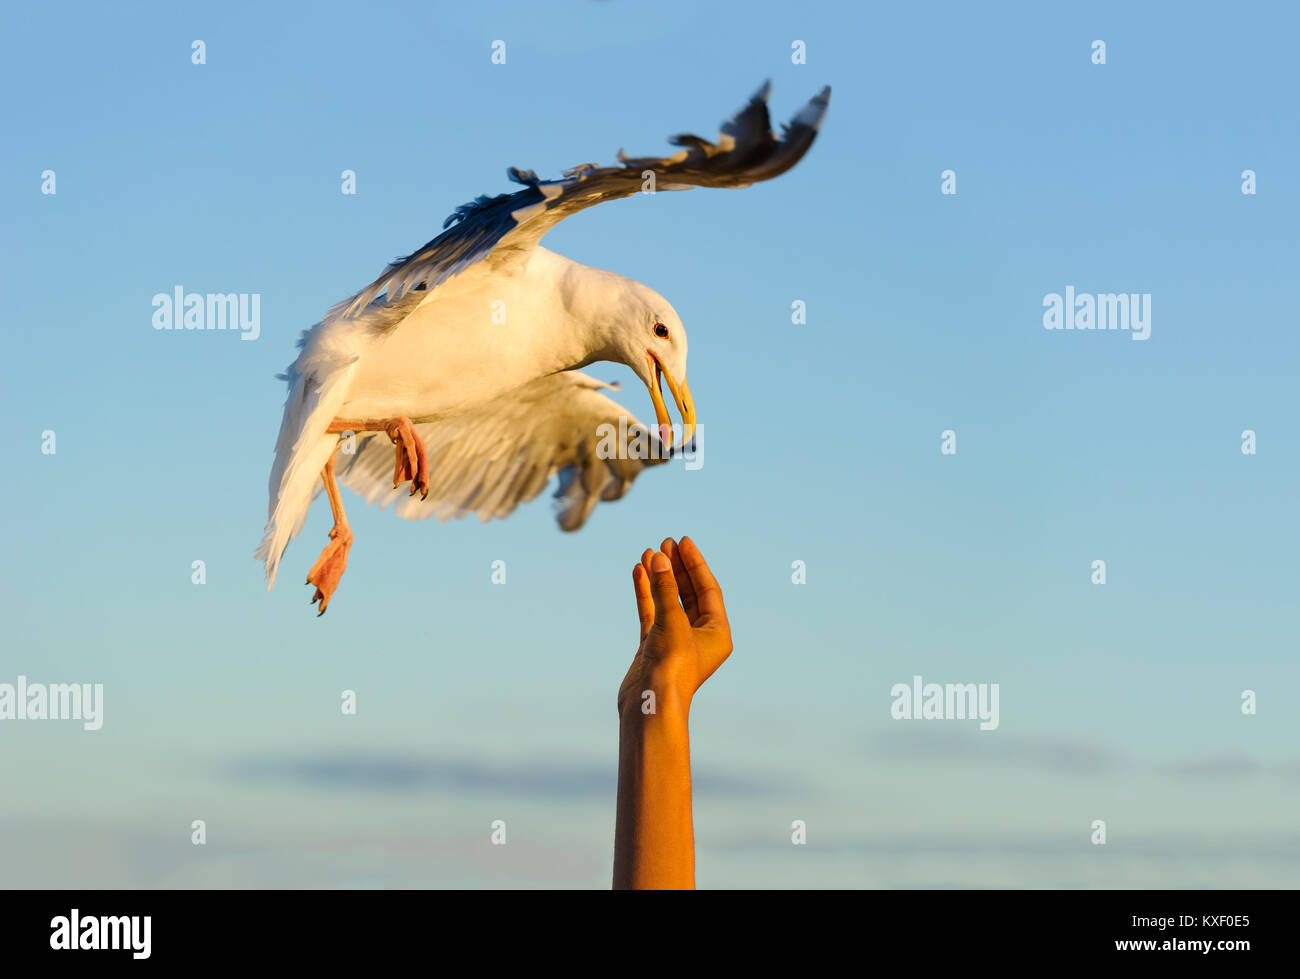 Bird flying man is an image of a bird in flight making contact with a man's hand in unity. Stock Photo